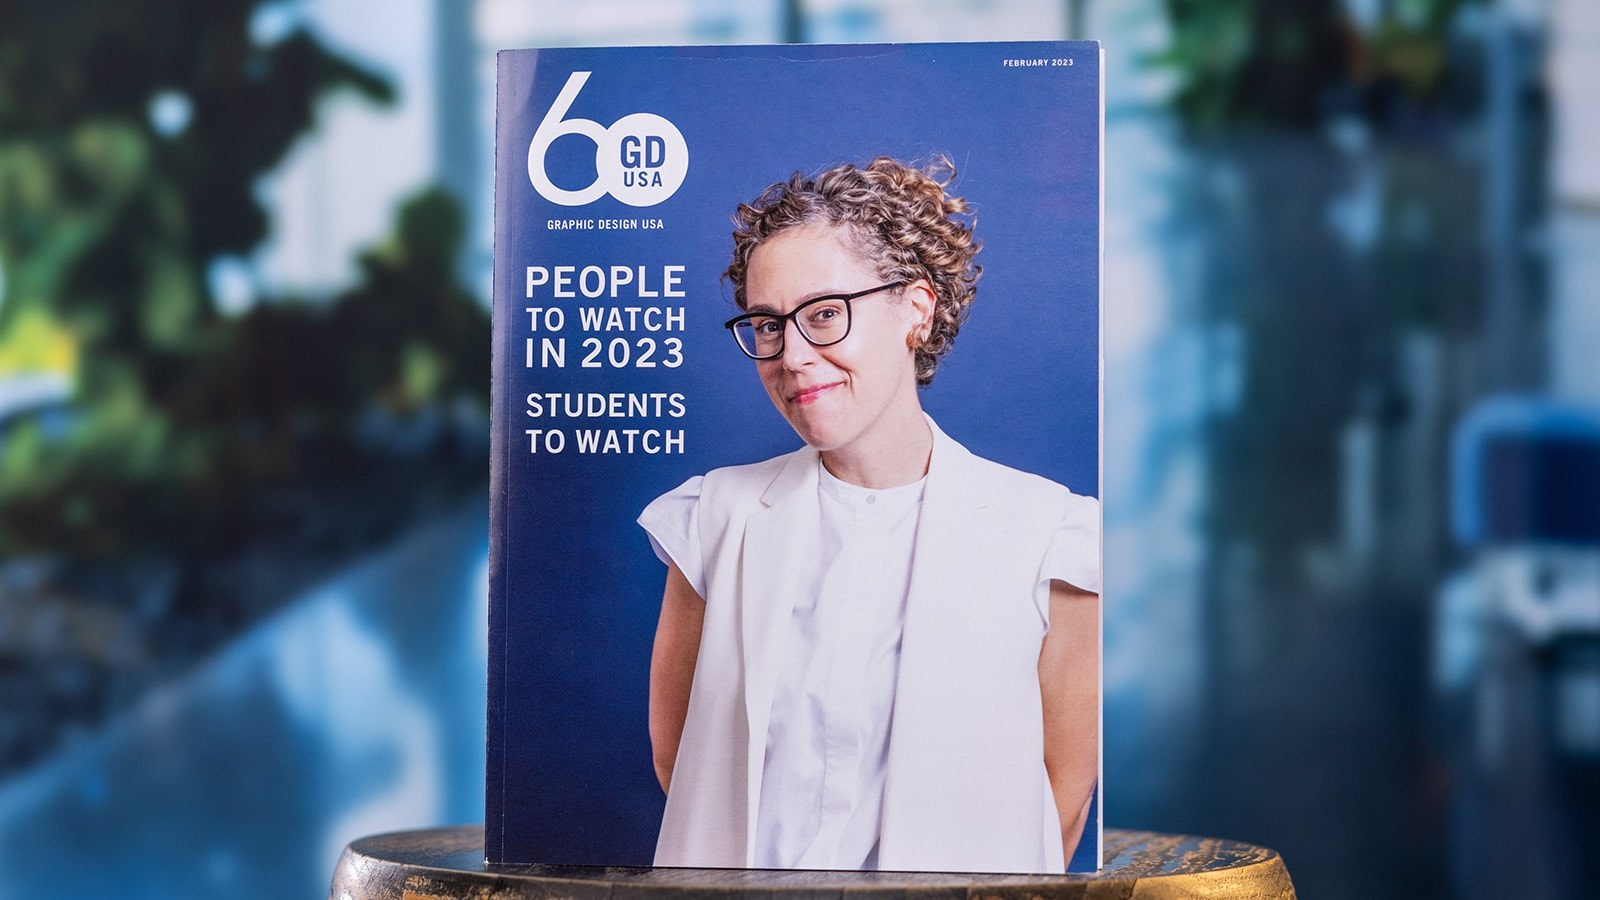 The February 2023 print edition of ‘Graphic Design USA.’ The cover features a smiling designer and text saying “People to Watch in 2023: Students to Watch.”